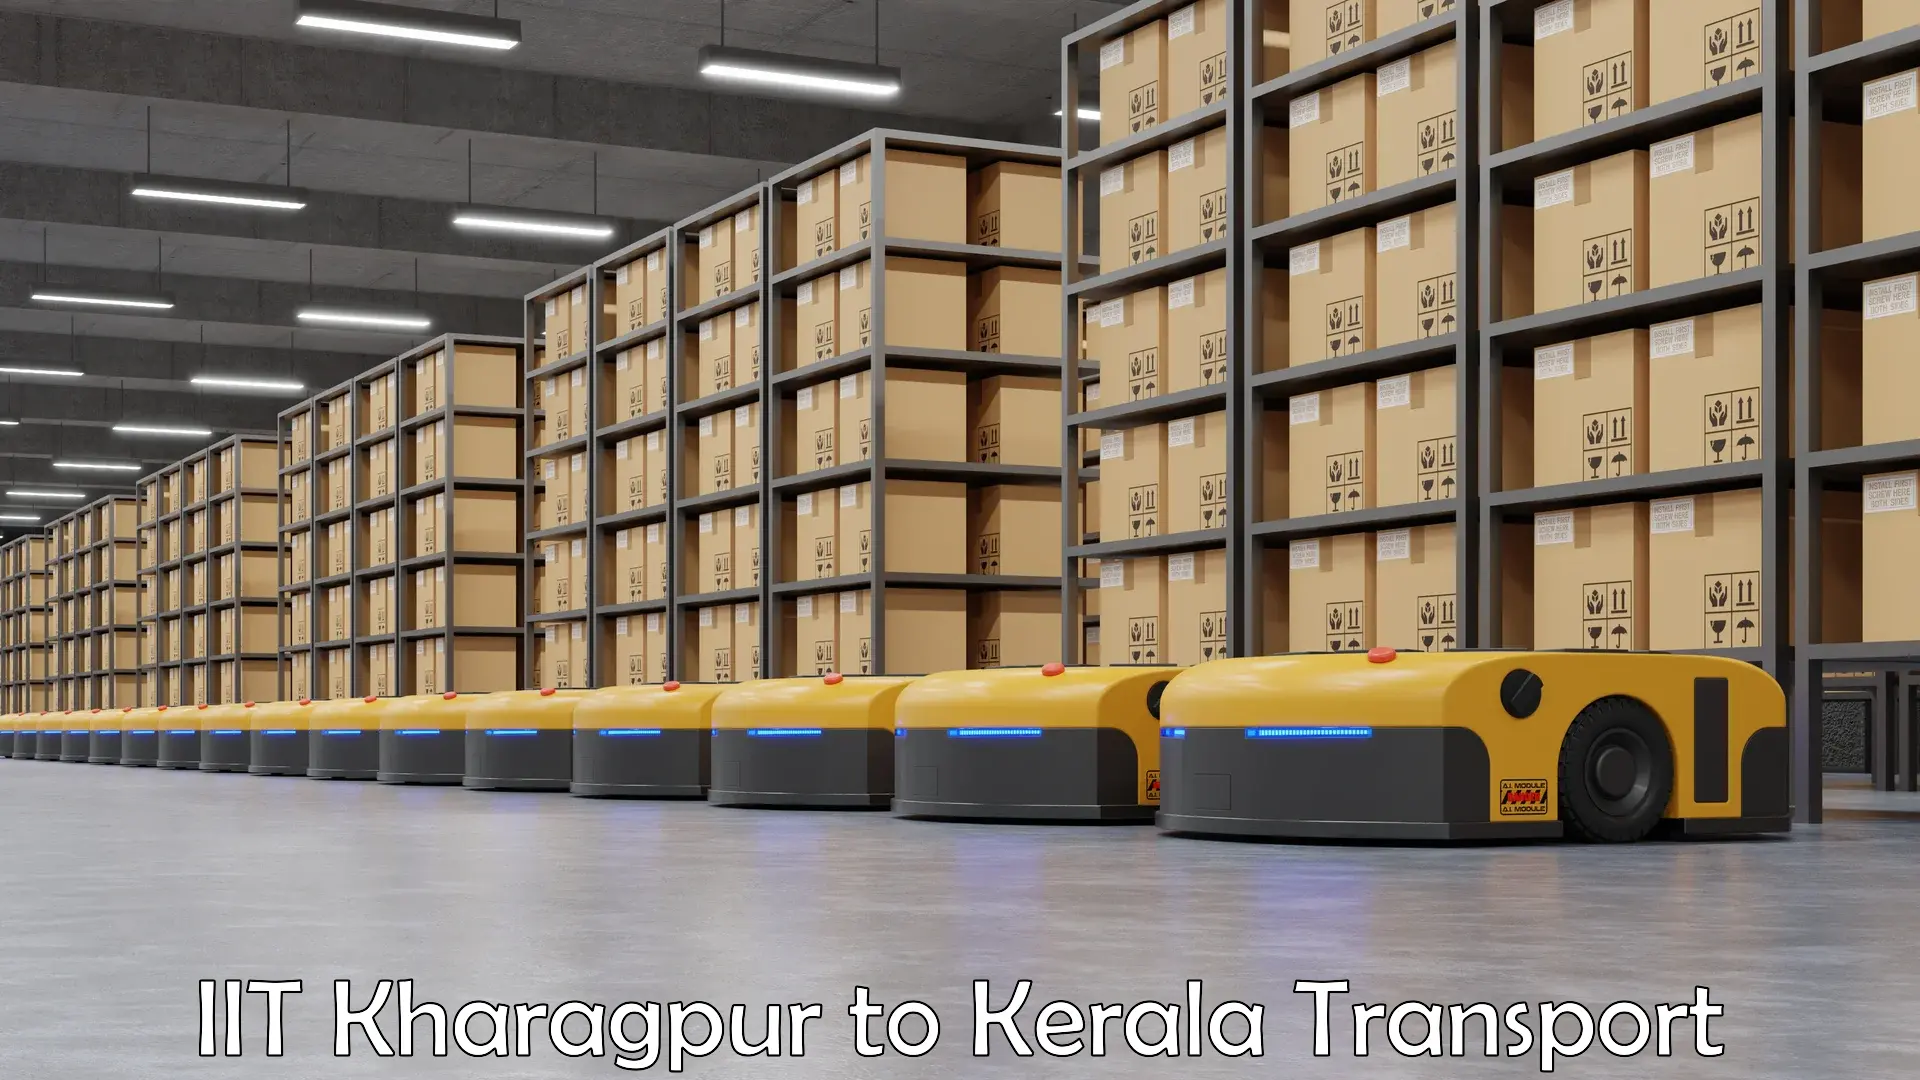 Container transport service IIT Kharagpur to NIT Calicut